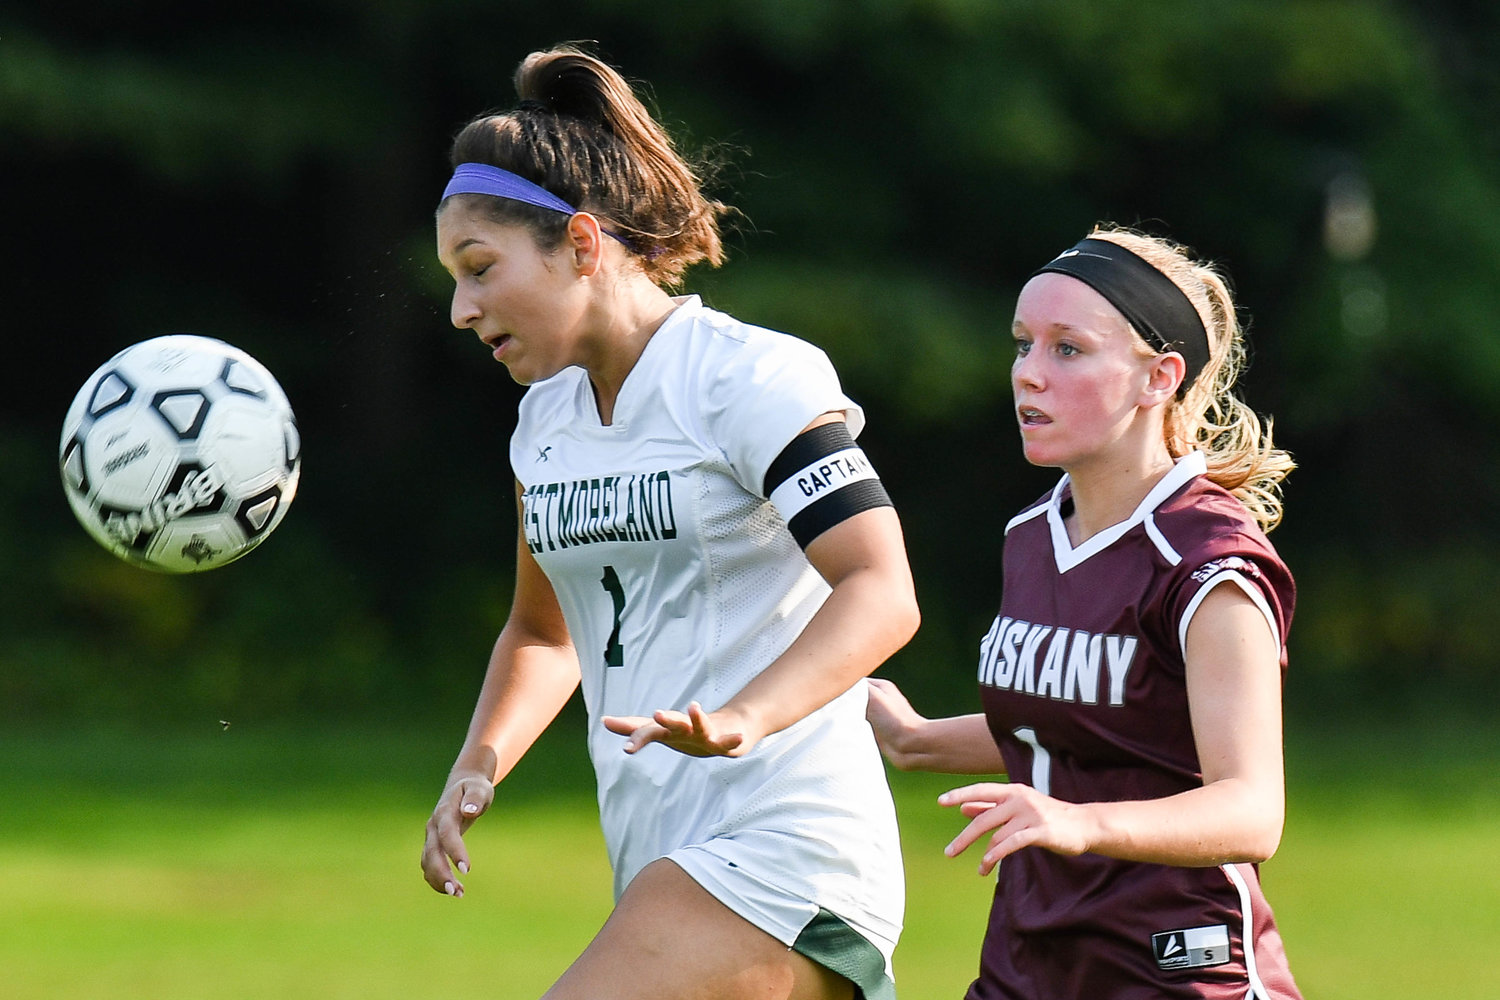 Westmoreland's Bailee Serianni heads the ball as Oriskany's Addison Fabio players her close during the game on Friday at Bernie Block Field in Oriskany. Westmoreland won 3-0.